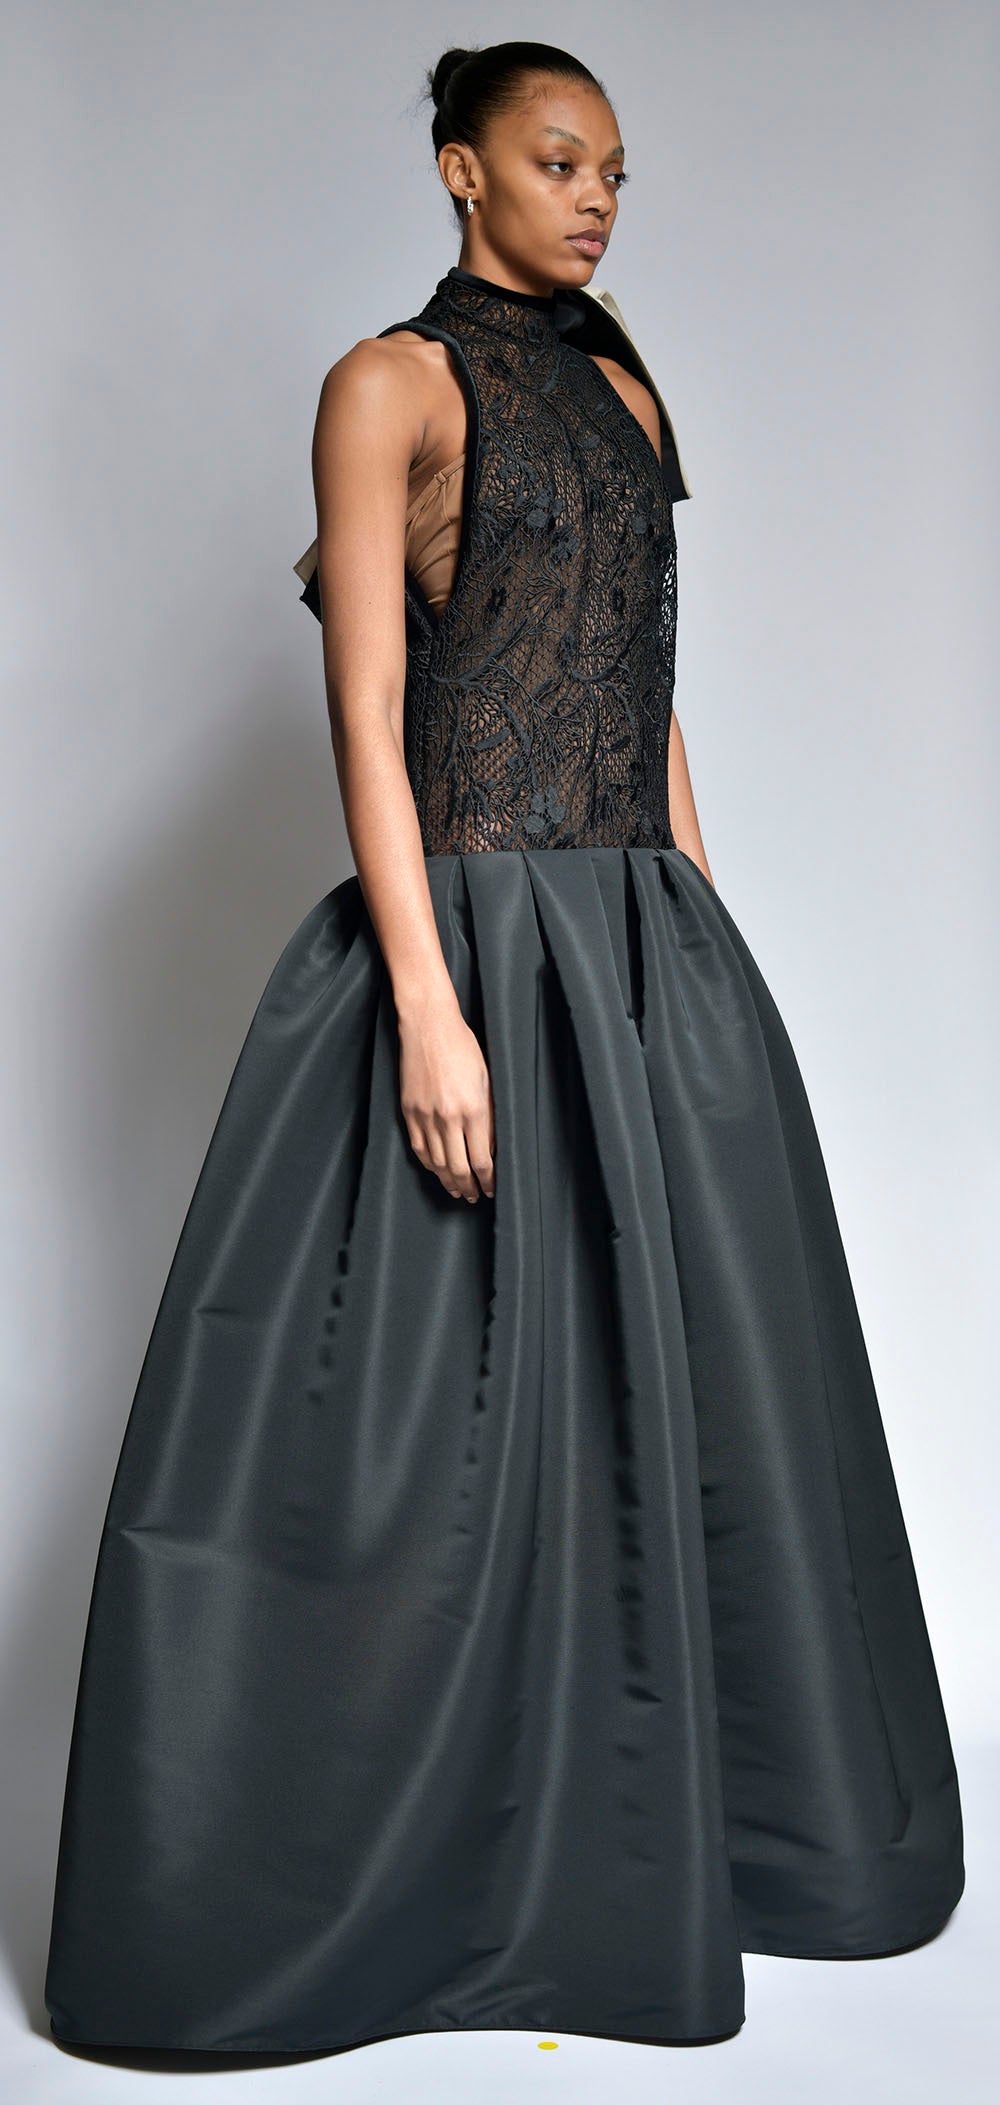 Onyx Cluny Lace Trapeze Gown with Faille Skirt and Bow Detail